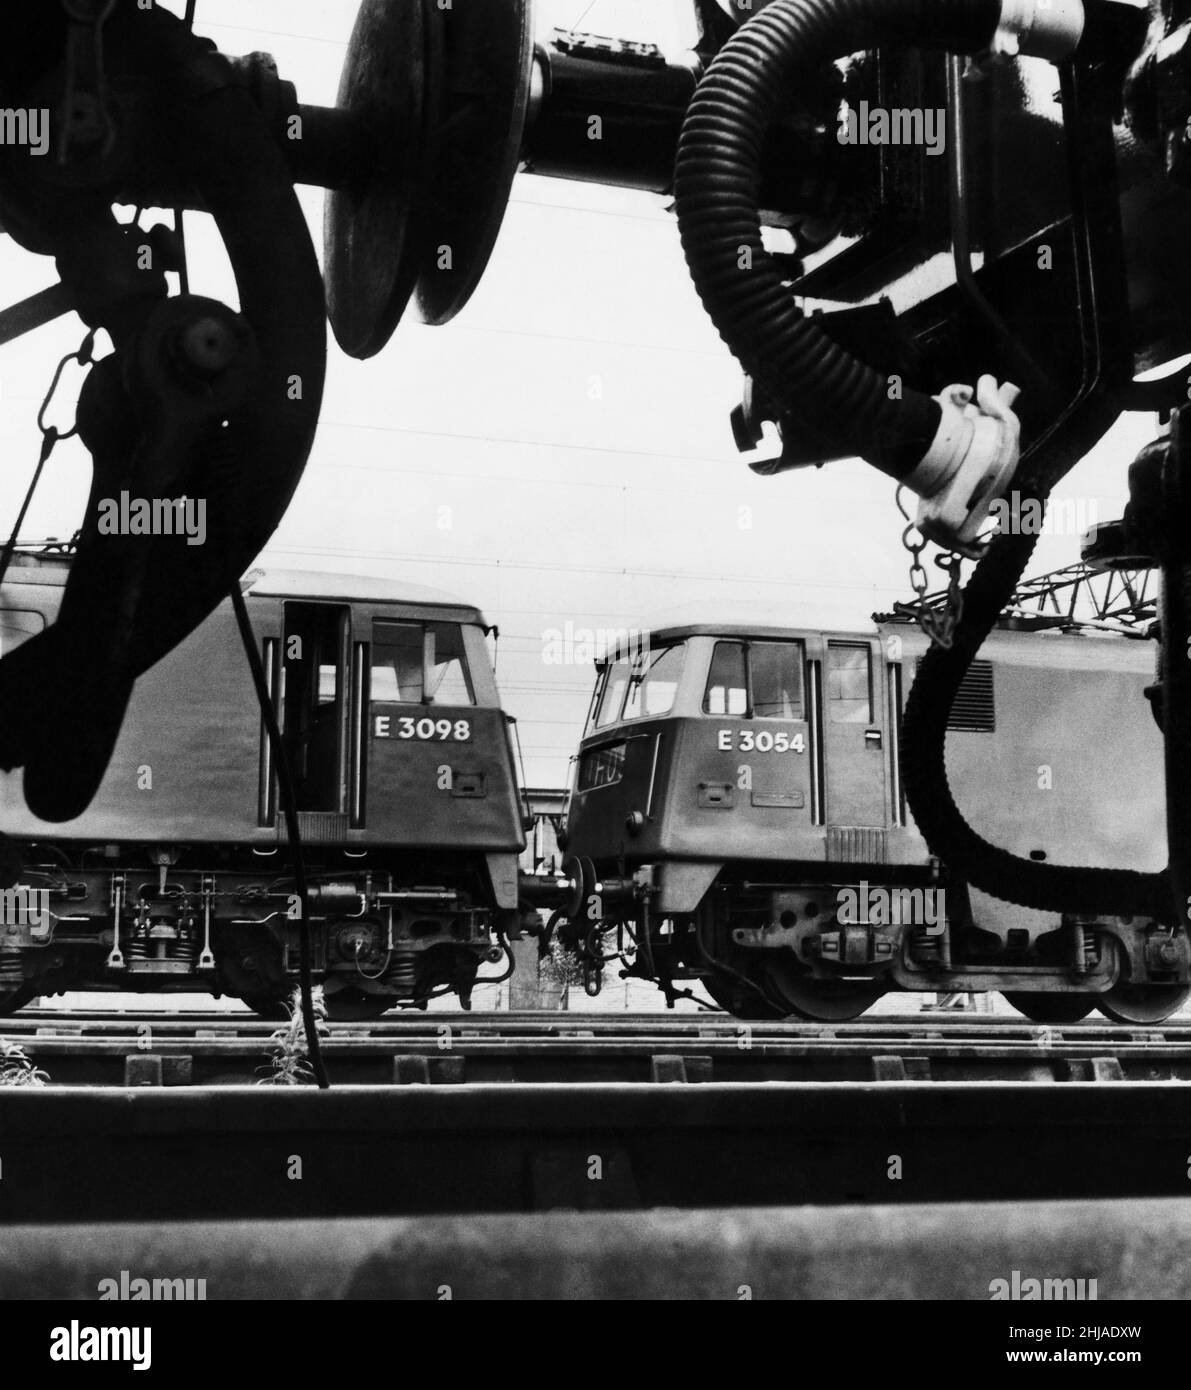 Two new British Rail Class 83  express  electric locomotive trains,  built by English Electric at Vulcan Foundry, Newton-le-Willows for the newly electrified West Coast Main Line between Birmingham and Liverpool.  Circa January 1963. Stock Photo